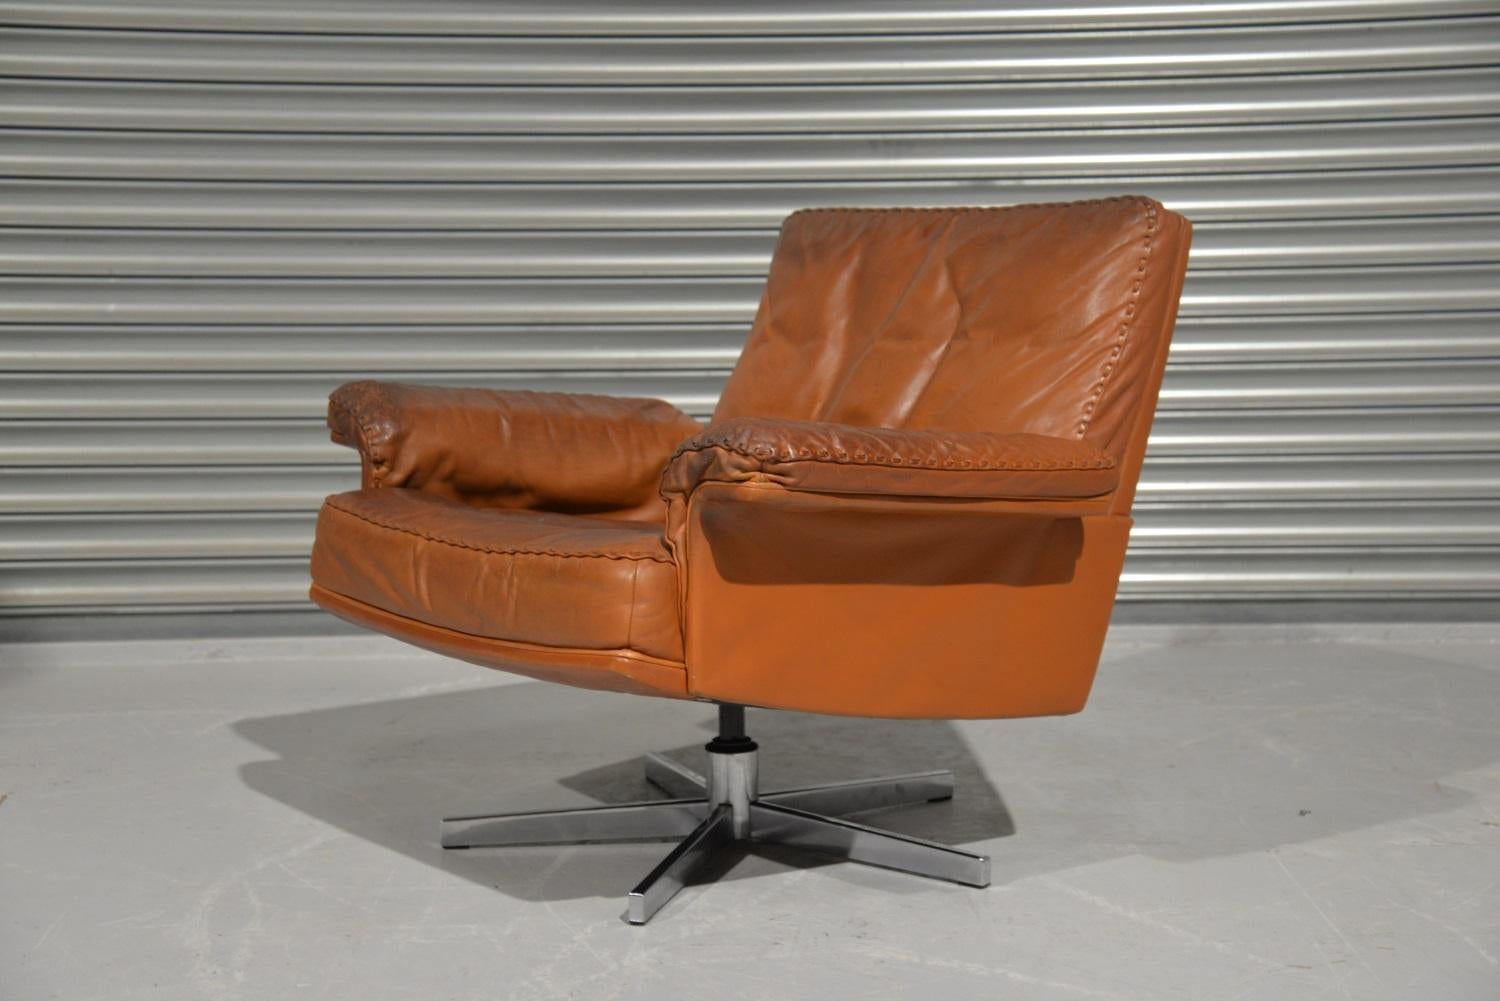 Discounted airfreight for our US and International customers ( from 2 weeks door to door)

We are delighted to bring to you an ultra-rare and highly desirable De Sede DS 35 swivel armchair. Hand built in the 1970`s by De Sede craftsman in